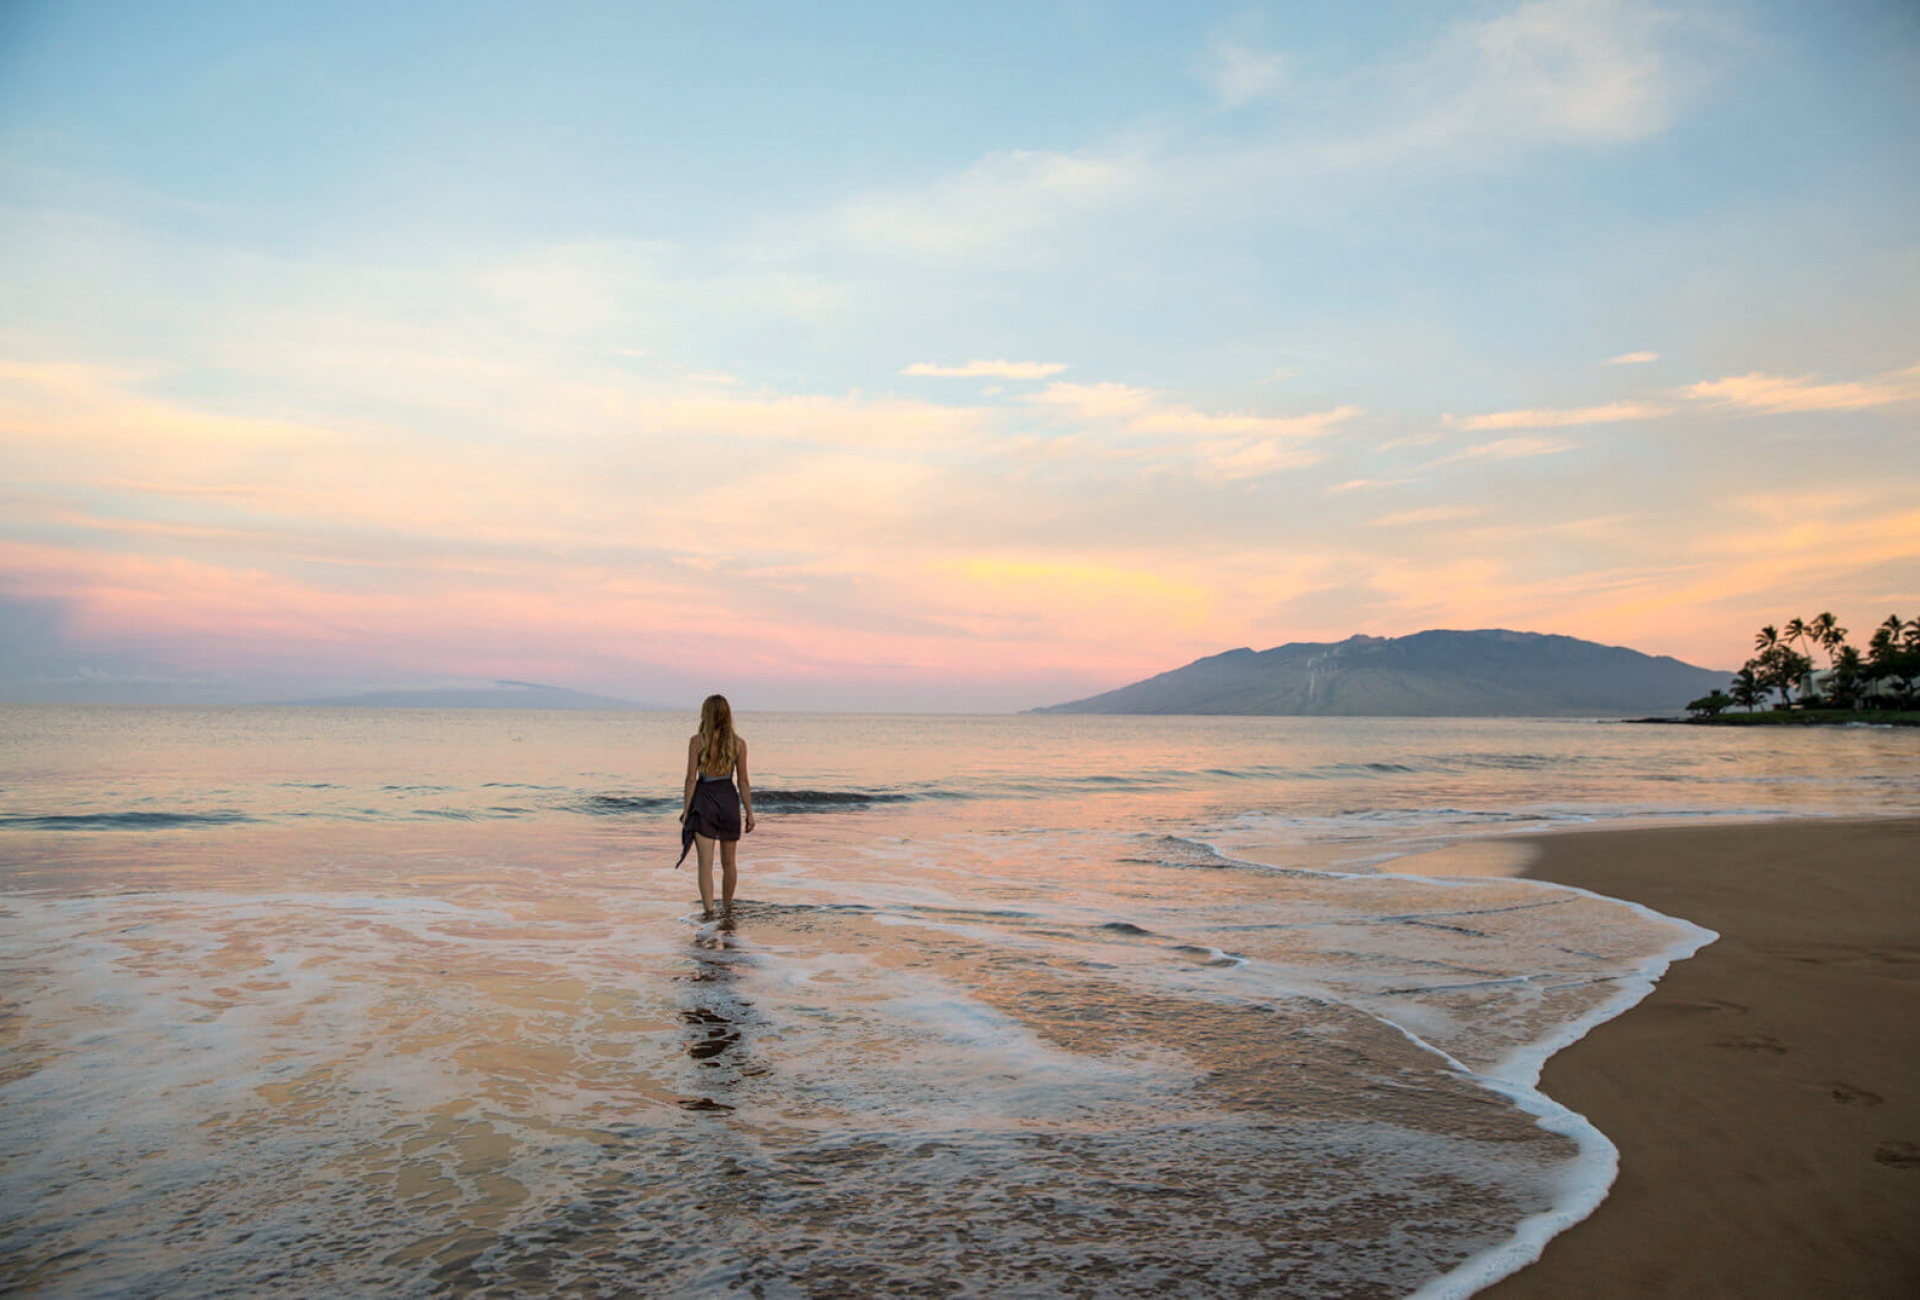 a woman walks toward the ocean on the beach with mountains in the background while the sun sets